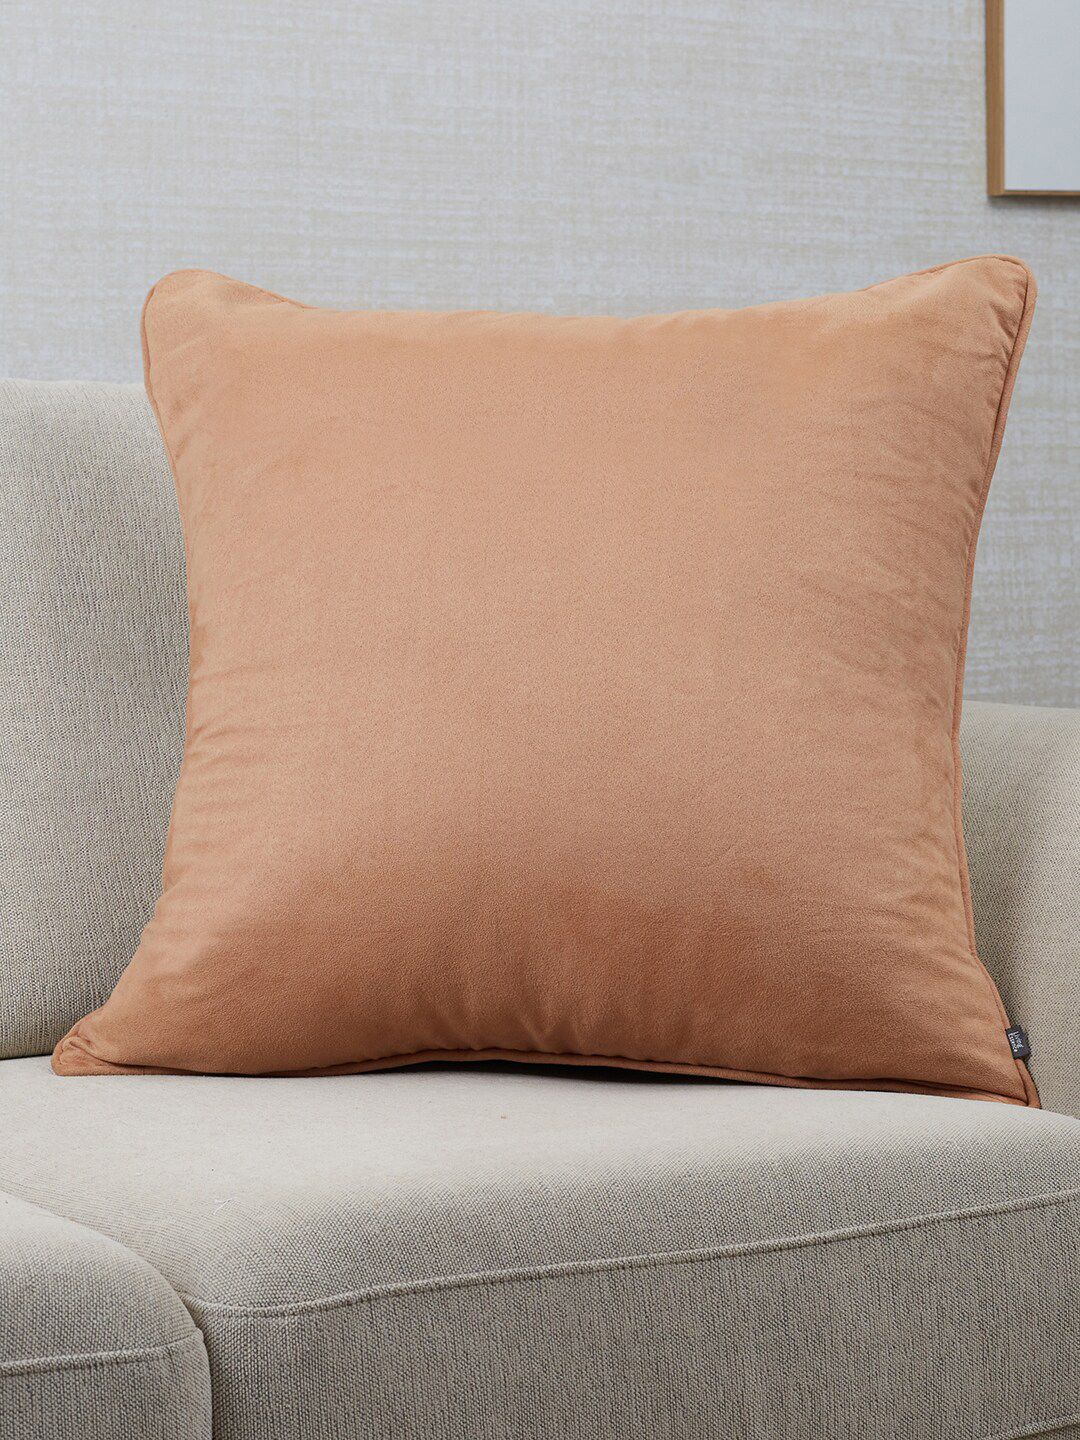 HomeTown Tan Brown & White Reversible Velvet Square Cushion Covers Price in India